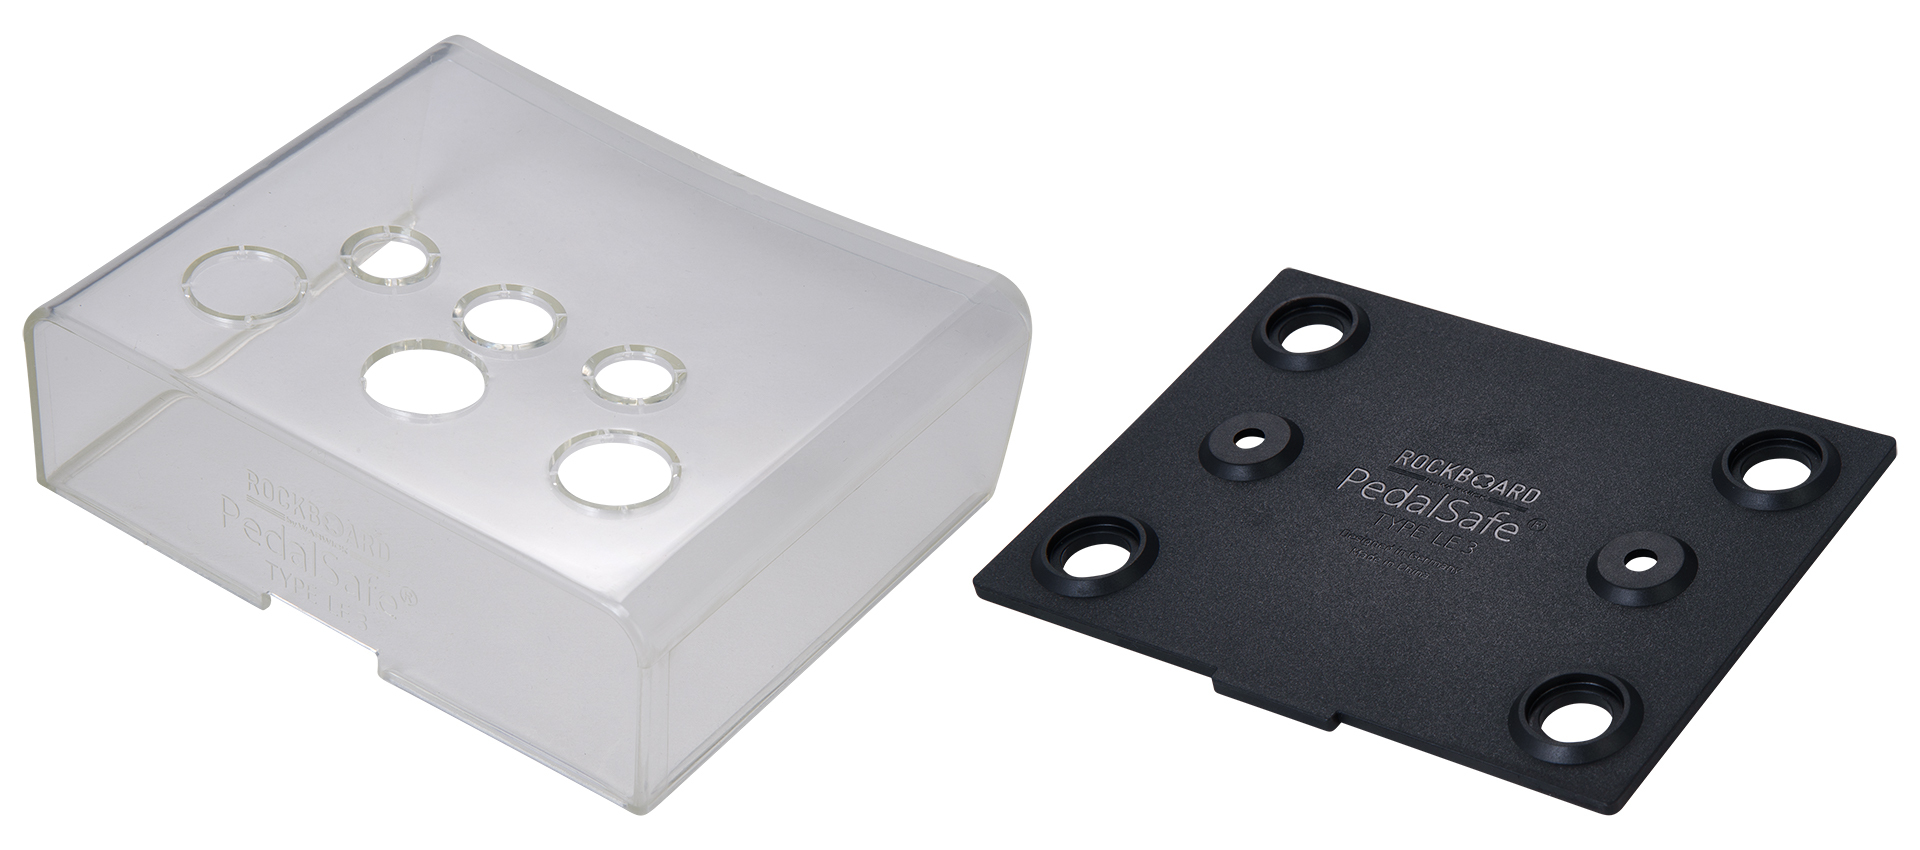 RockBoard PedalSafe Type LE3 - Protective Cover and Universal Mounting Plate for LEHLE Parallel SW II, Little Dual pedals